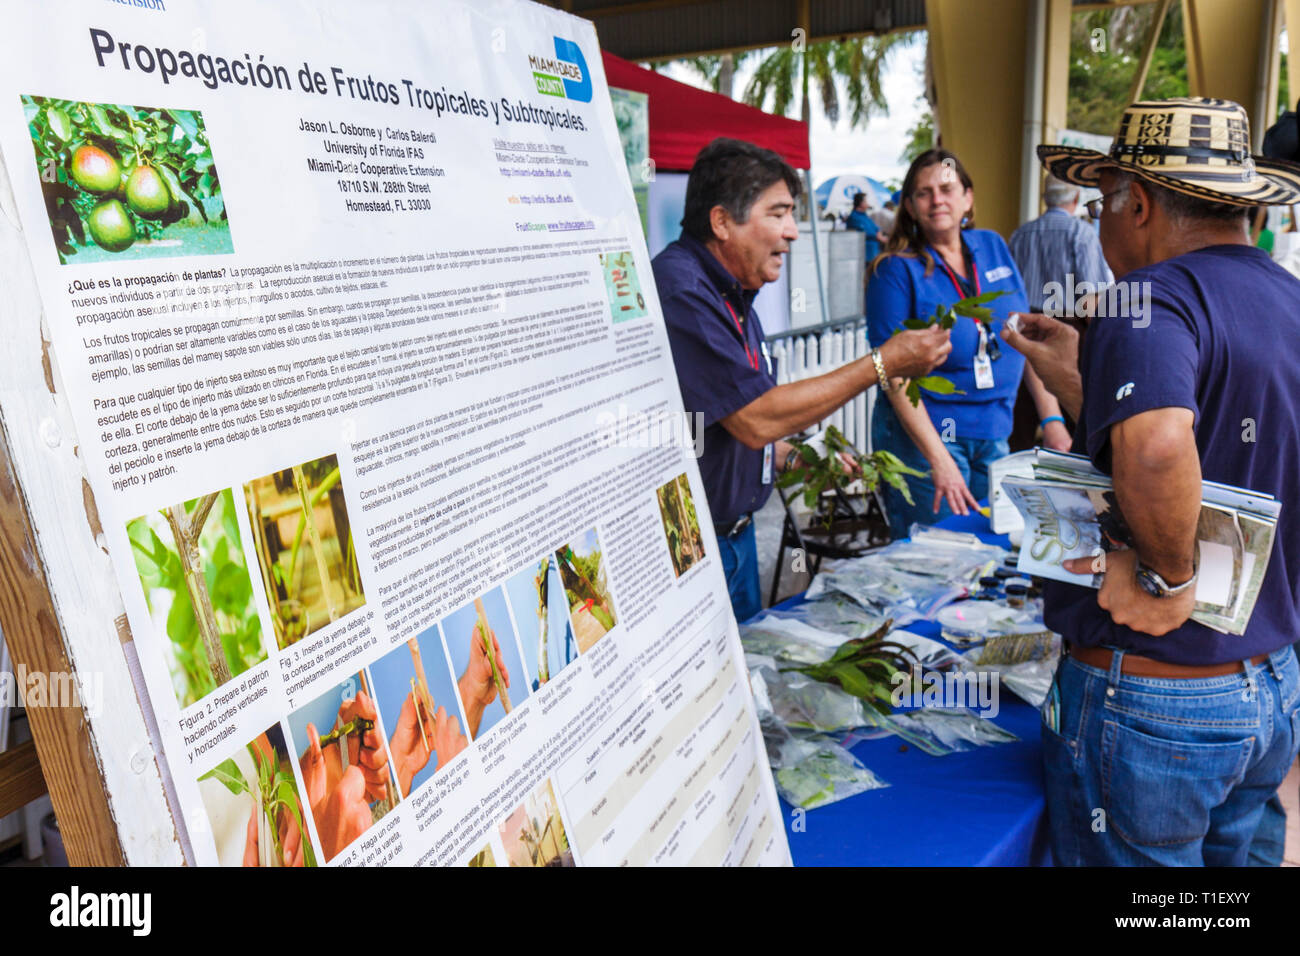 Miami Florida,Kendall,Tropical Park,Miami International Agriculture & Cattle Show,breeding,livestock trade,agri business,horticulture,poster,tropical Stock Photo